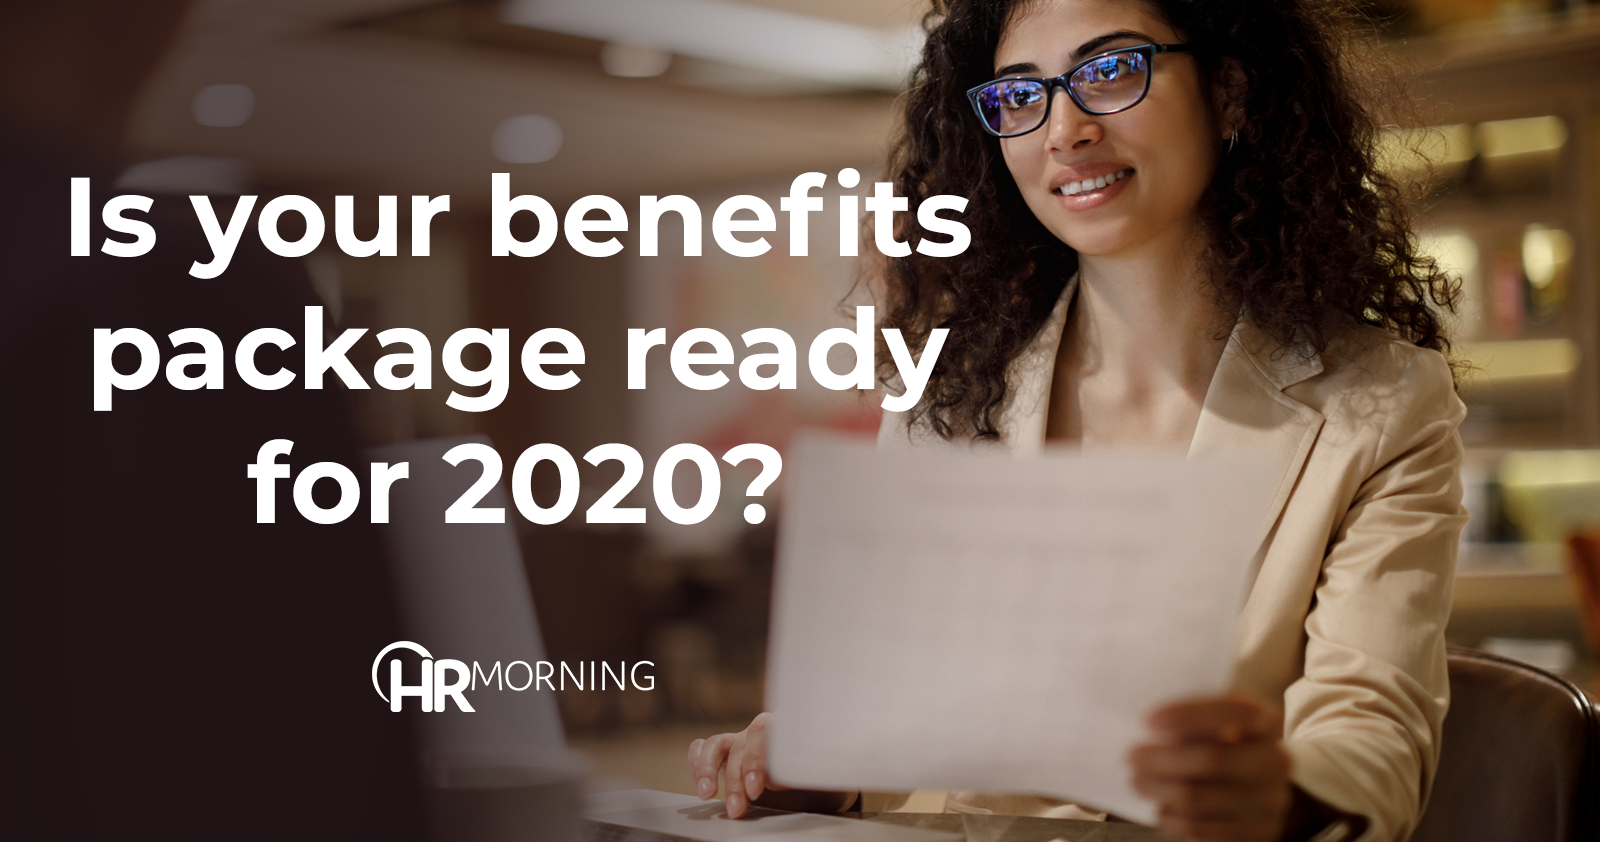 Is your benefits package ready for 2020?